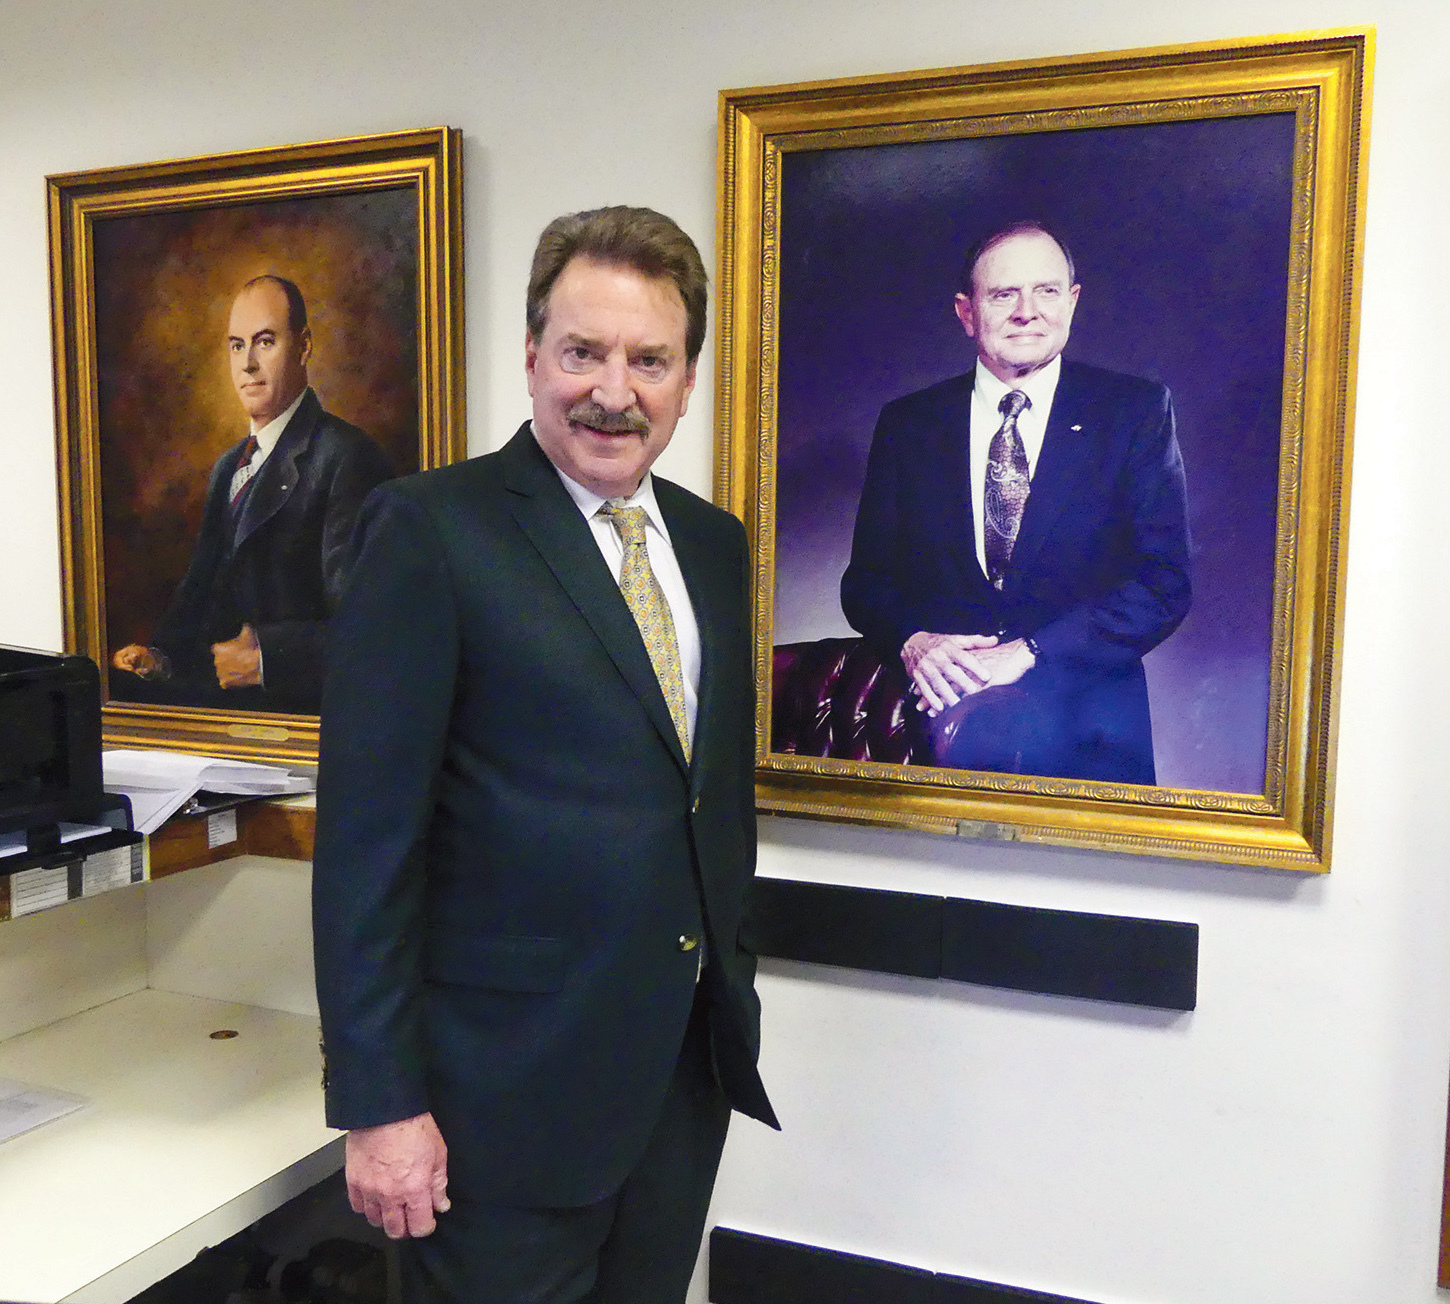 Cecil W. Powell & Company President Fitzhugh Powell Jr. with portraits of his grandfather, Cecil Powell, and his father, Fitzhugh Powell Sr., that are displayed in the insurance agency’s offices.